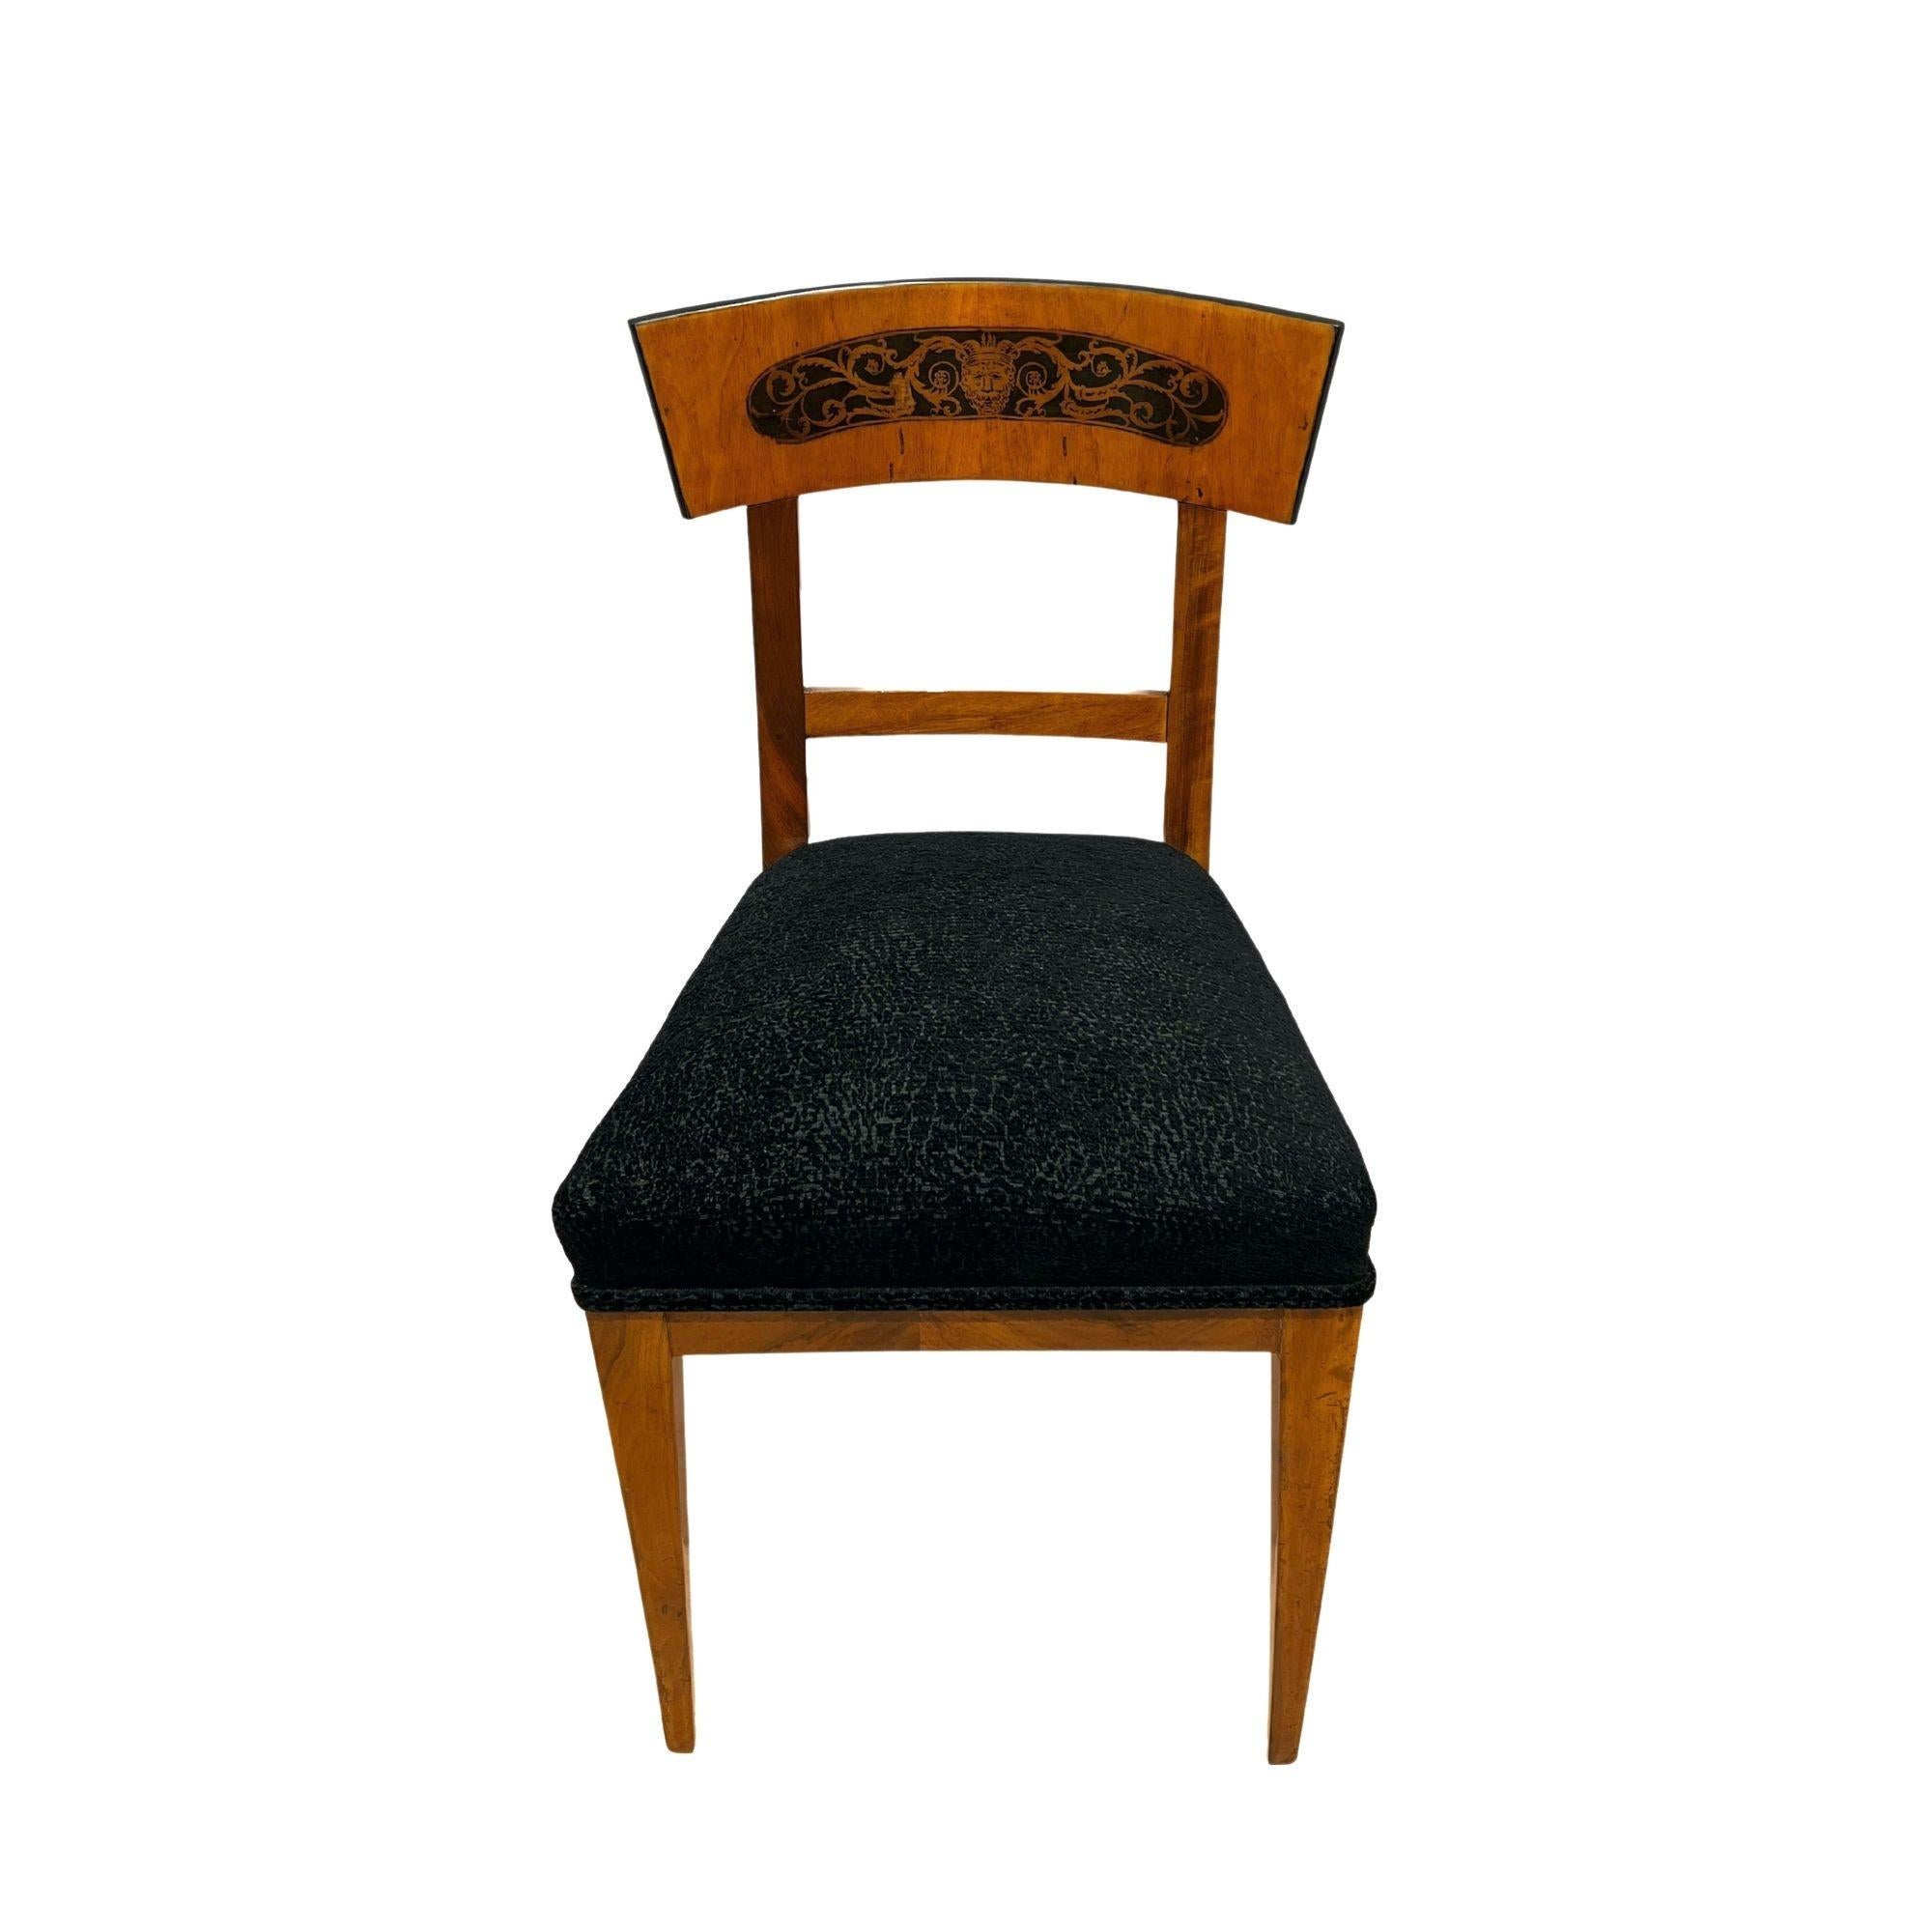 Elegant and rare Biedermeier chair from South Germany around 1820.
Cherry wood veneered and solid. Curved back board. Beautiful original tush /ink wash painting. Very comfortable seat. Black upholstery fabric.
Dimensions: H 89 cm x B 46,5 cm x T